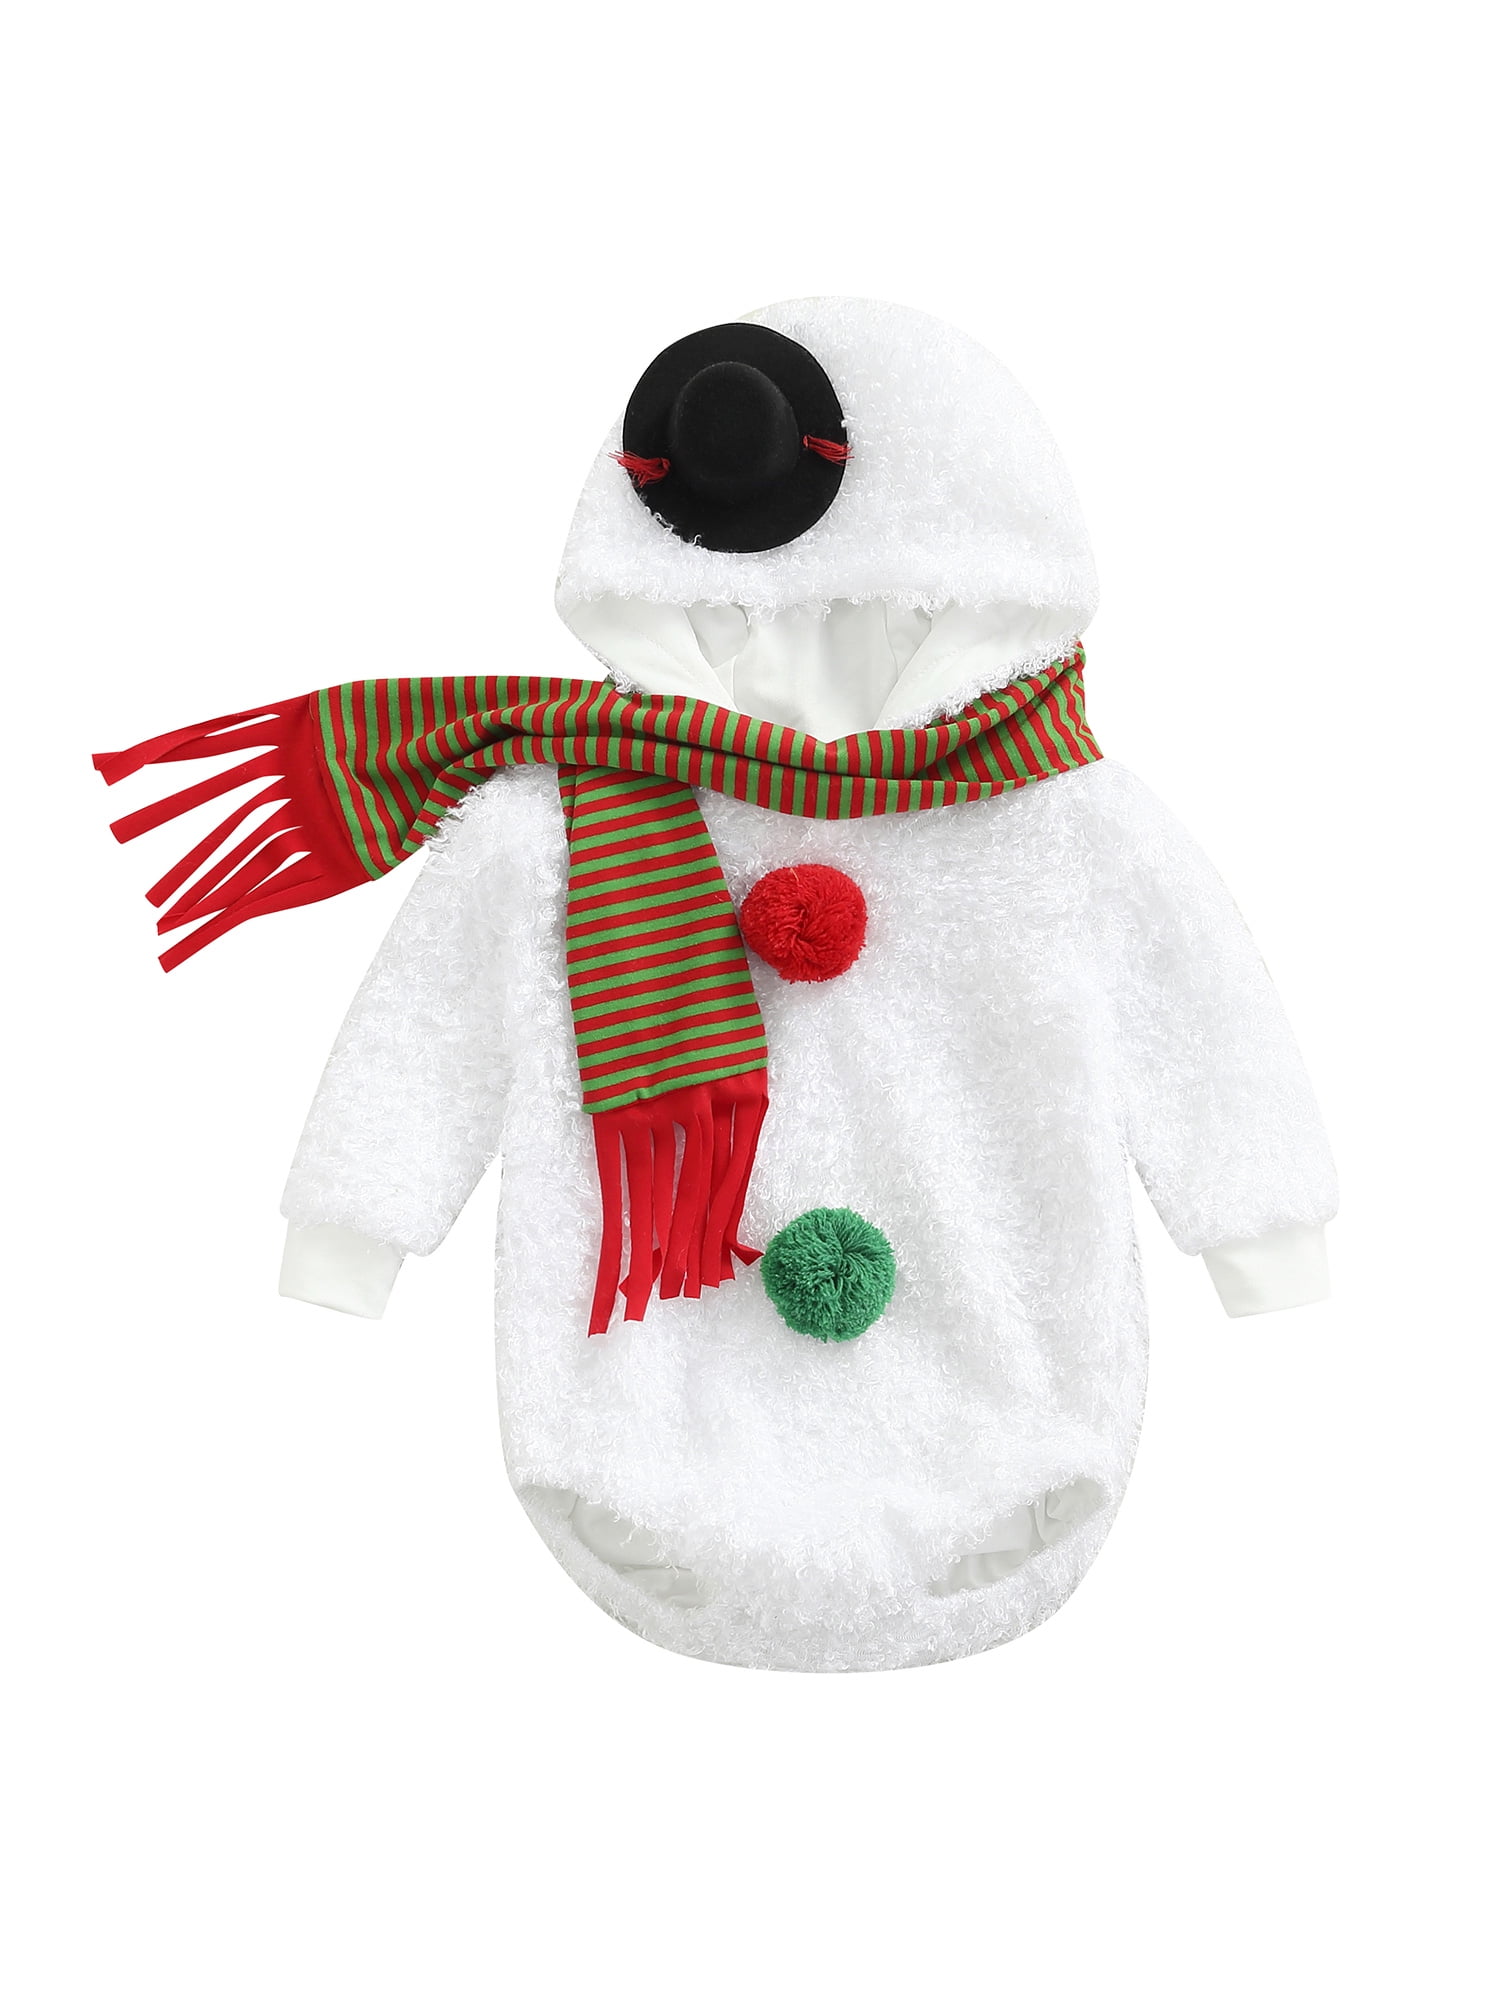 Snowman Costume Infant Baby Cosplay Newborn Suit Clothing Set Christmas kids Toy 